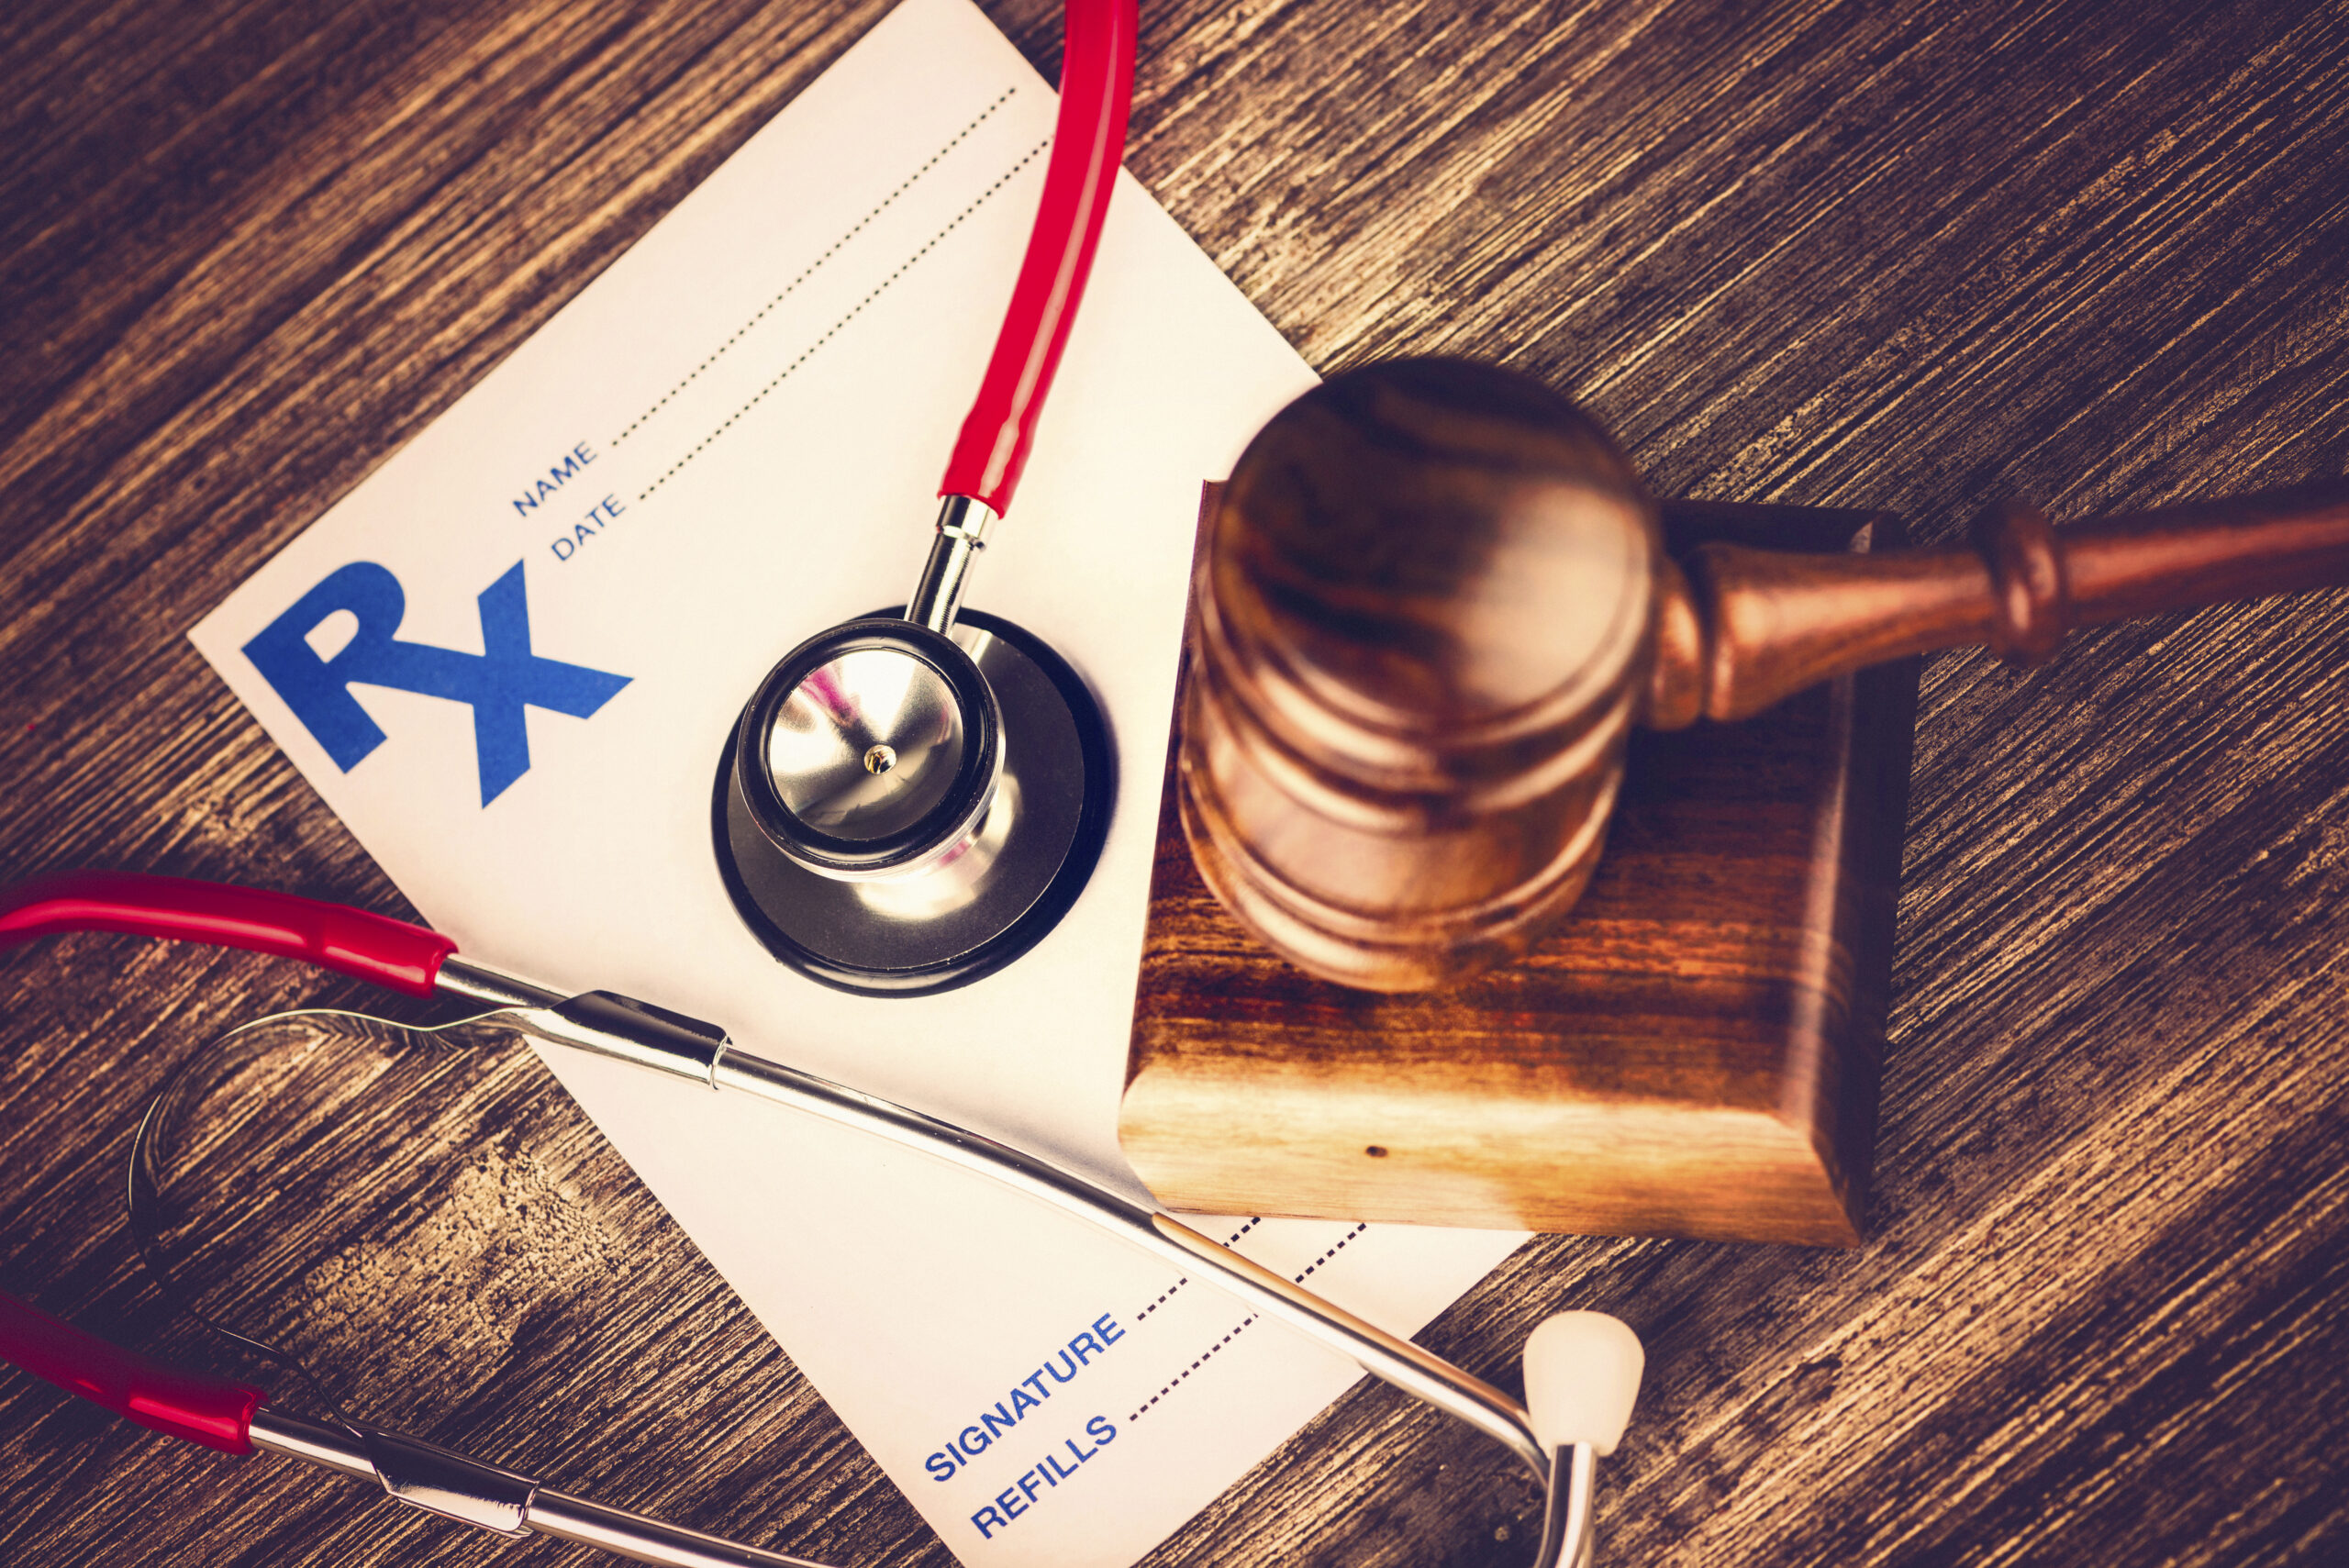 Medical Malpractice A mix of standard and nonstandard coverages